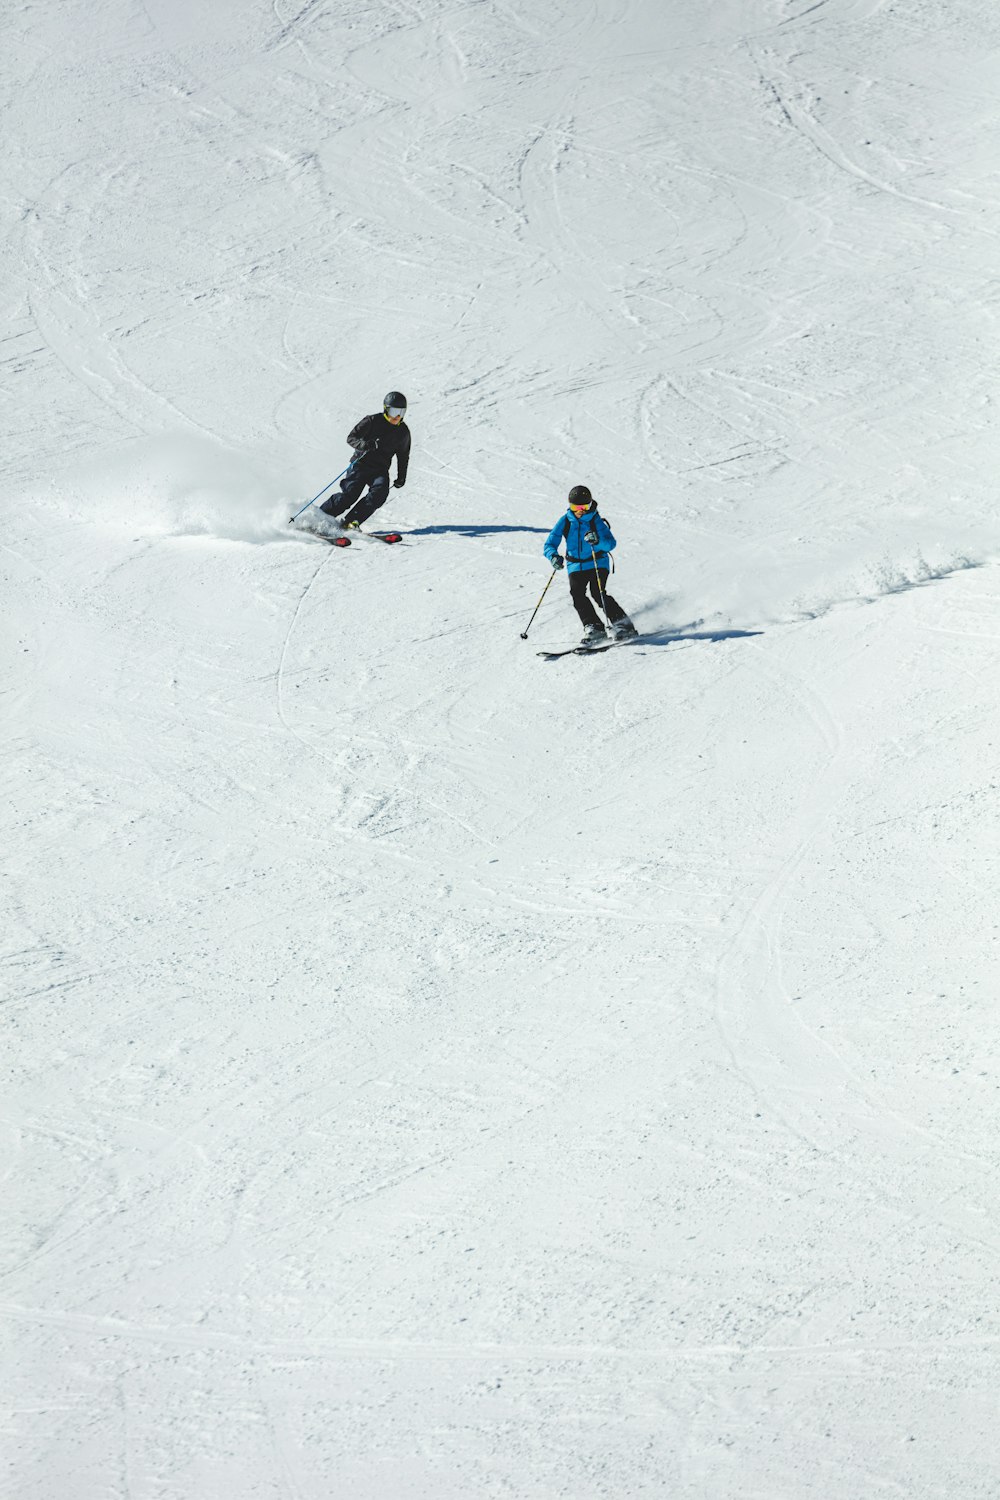 person in blue jacket and black pants riding ski blades on snow covered ground during daytime